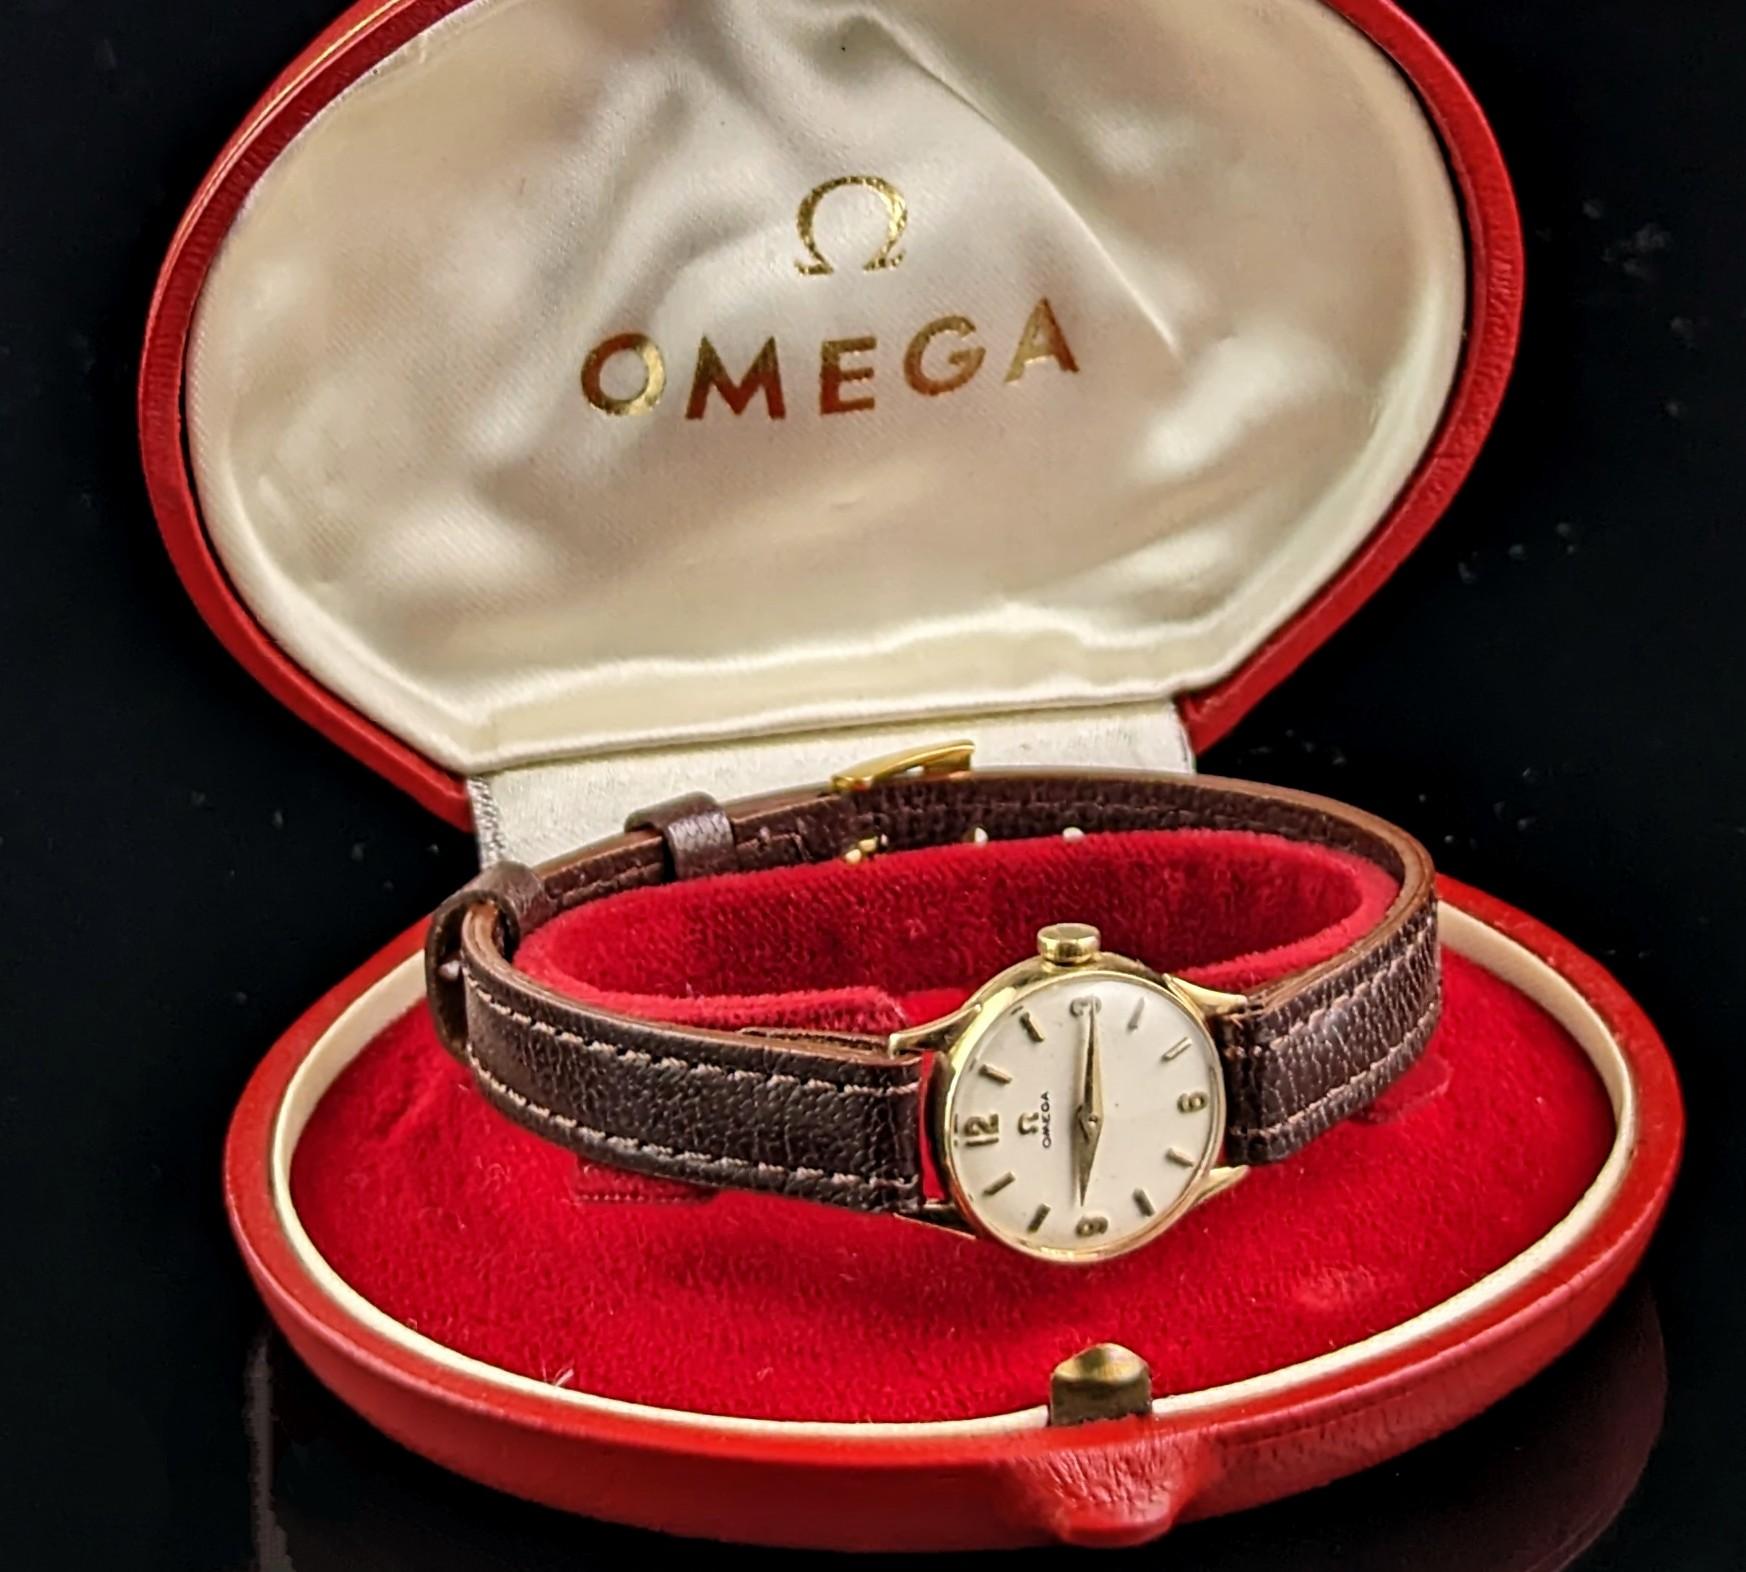 A gorgeous vintage 9ct gold ladies Omega wristwatch.

It has a 9ct yellow gold case, circular in shape with an off white tone dial with gold Arabic numerals and hands and a lightly domed crystal.

Made by the renowned Omega the dial is marked Omega